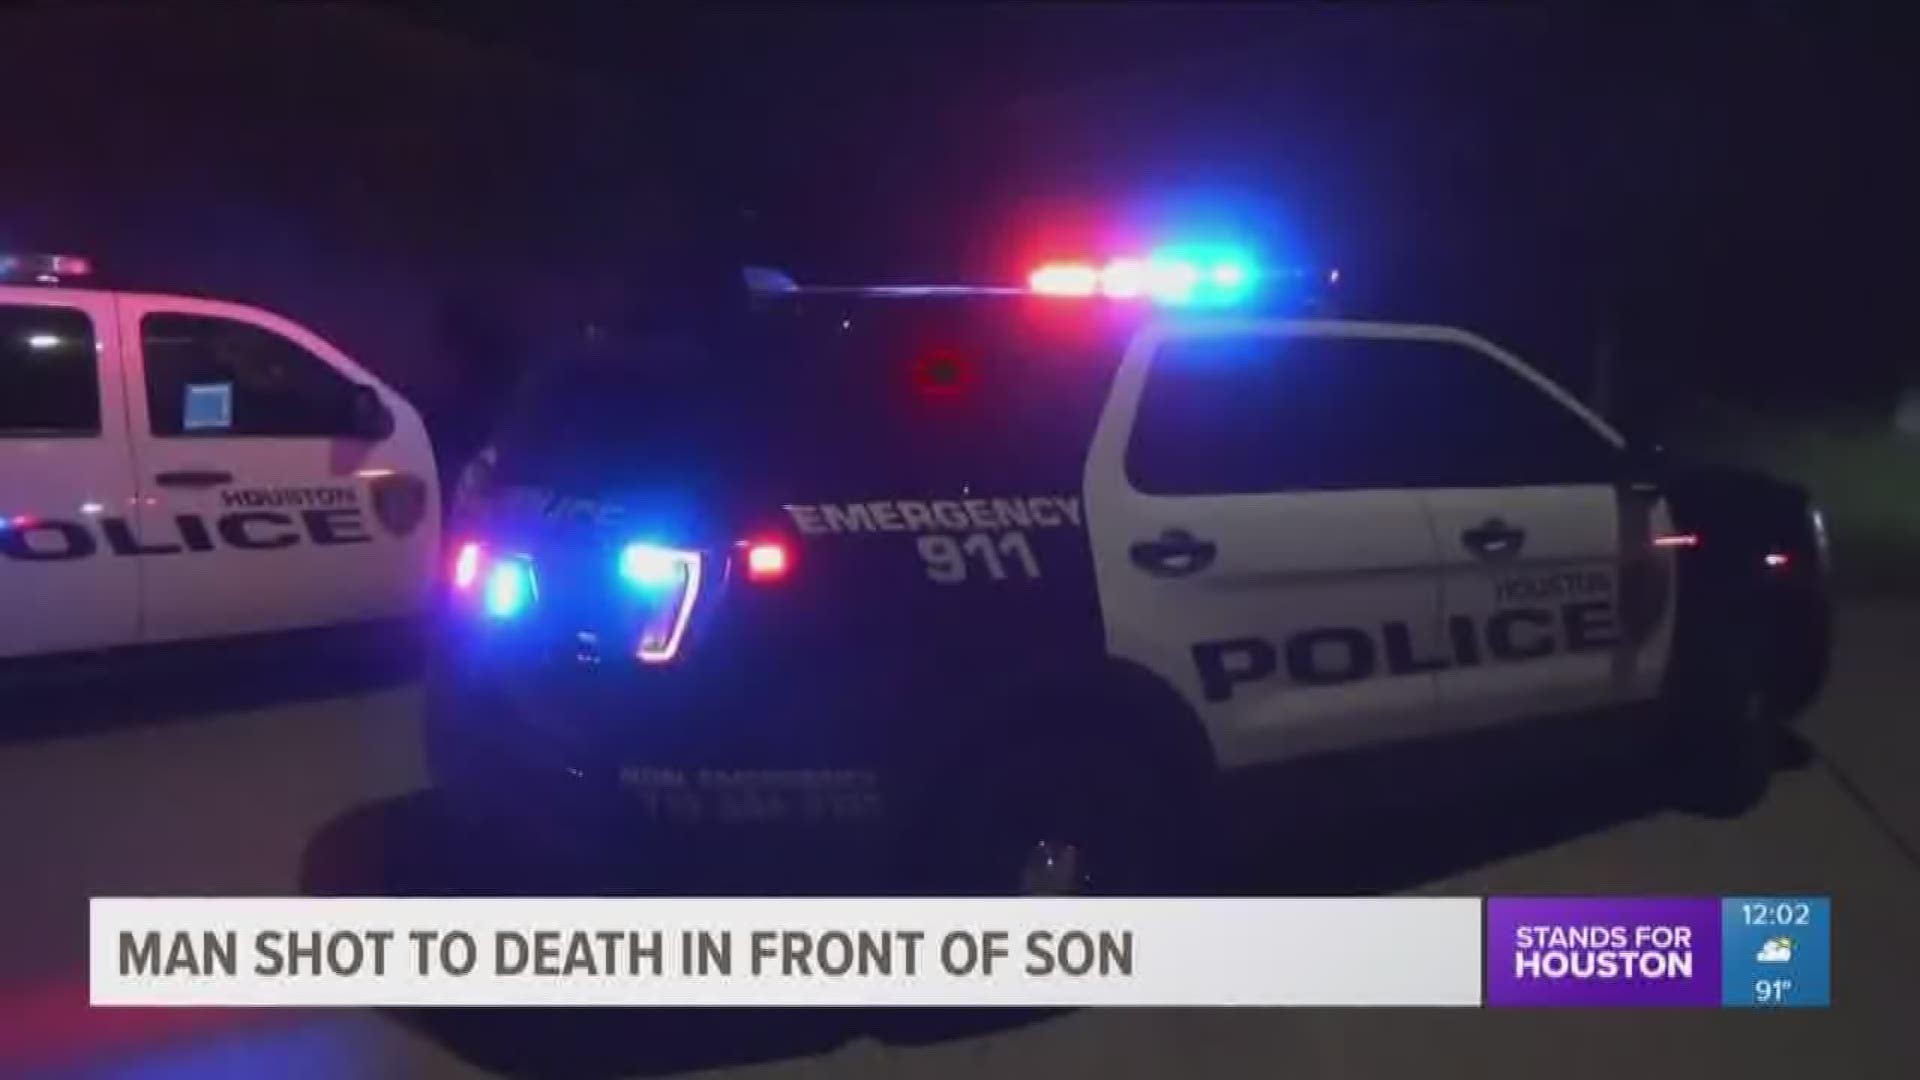 A man was shot to death in front of his son on the lawn of a home in southwest Houston overnight.